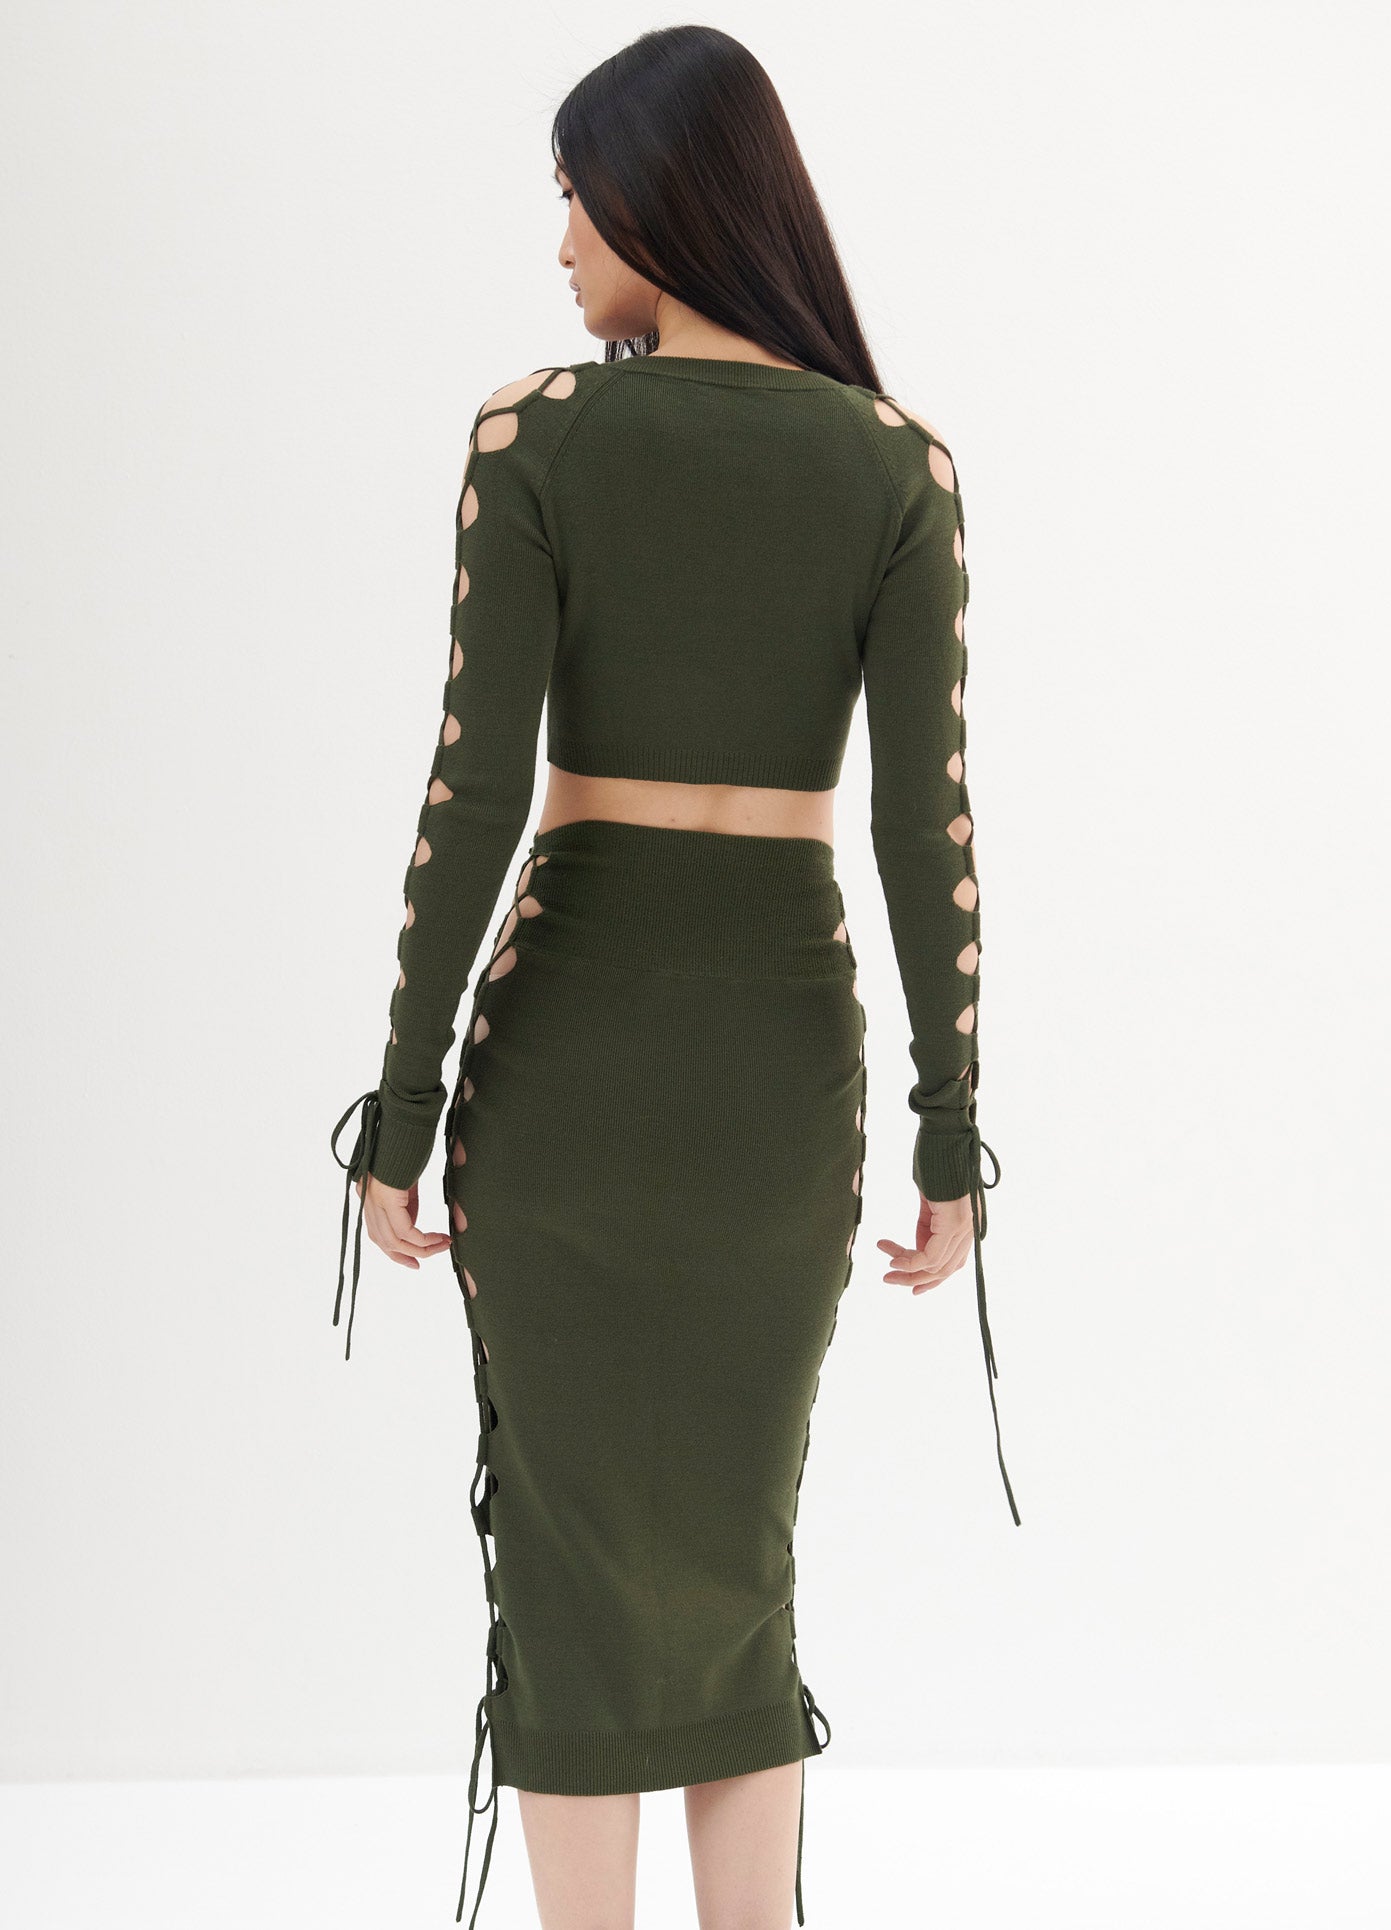 MONSE Lacing Detail Cropped Sweater in Olive on Model Back View